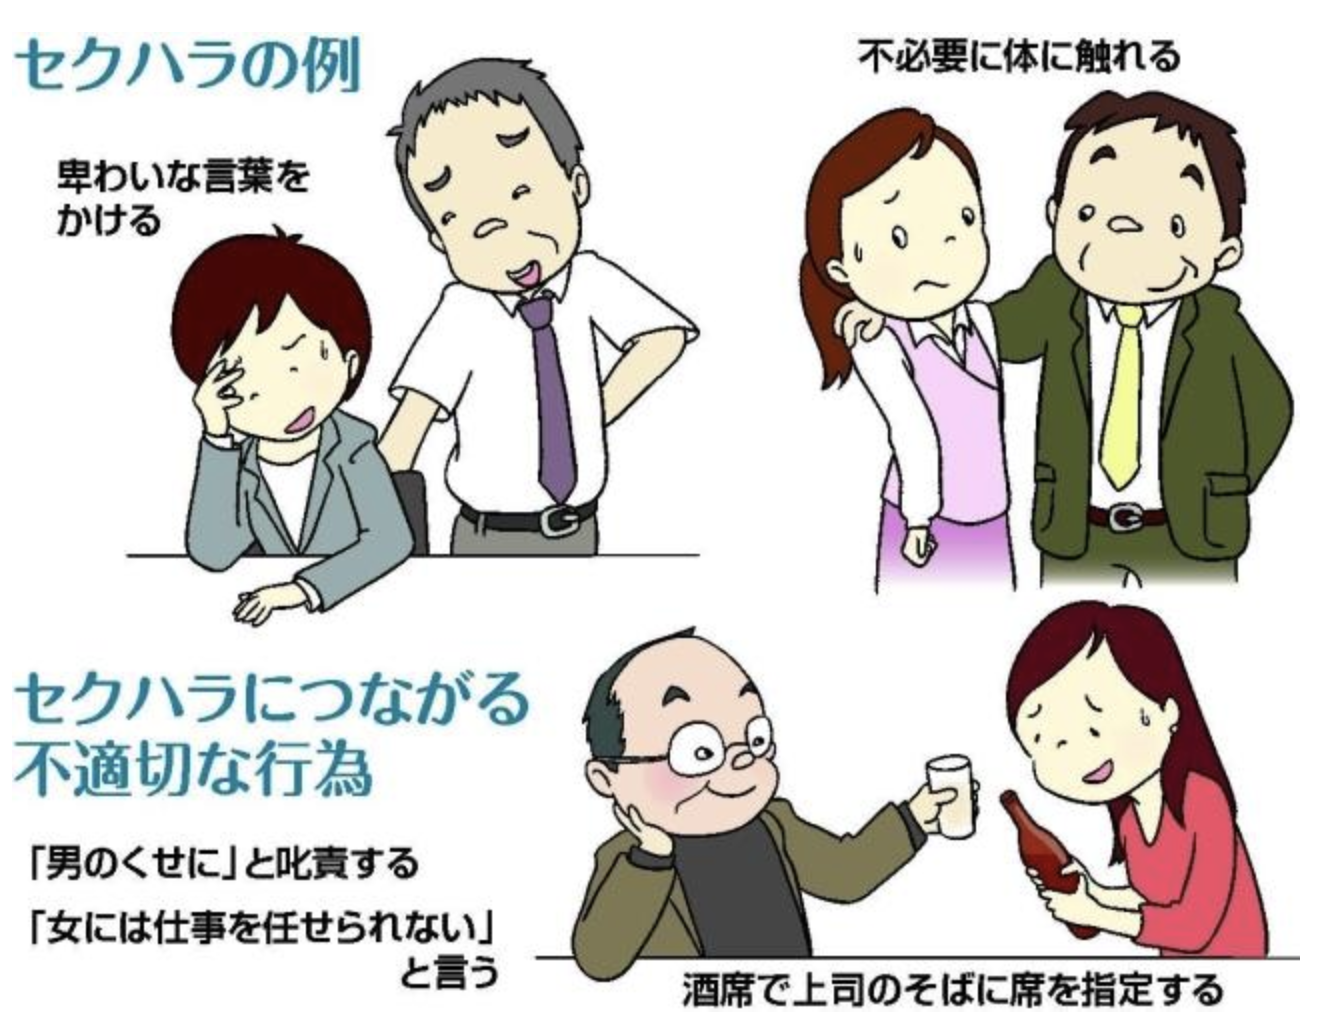 Cartoon published in Yomiuri Shinbun to show examples of what constitutes as sexual harassment in the workplace.